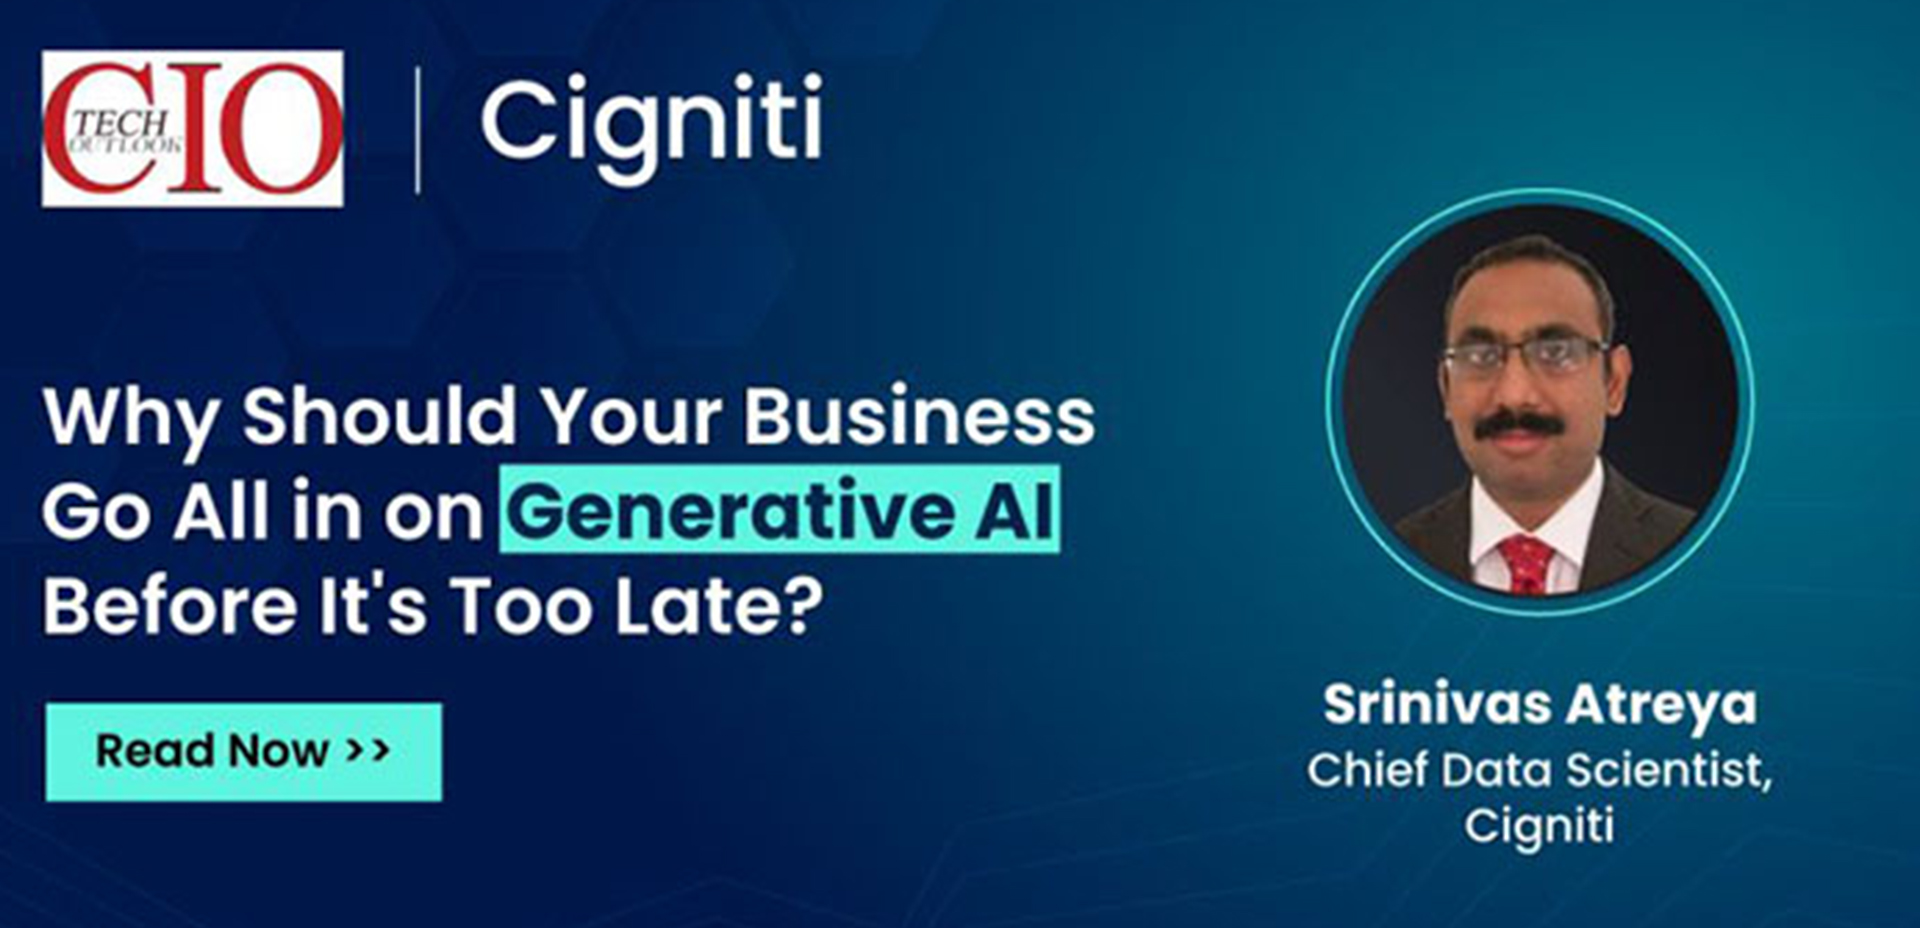 Why Should Your Business Go All in on Generative AI Before it's too Late?